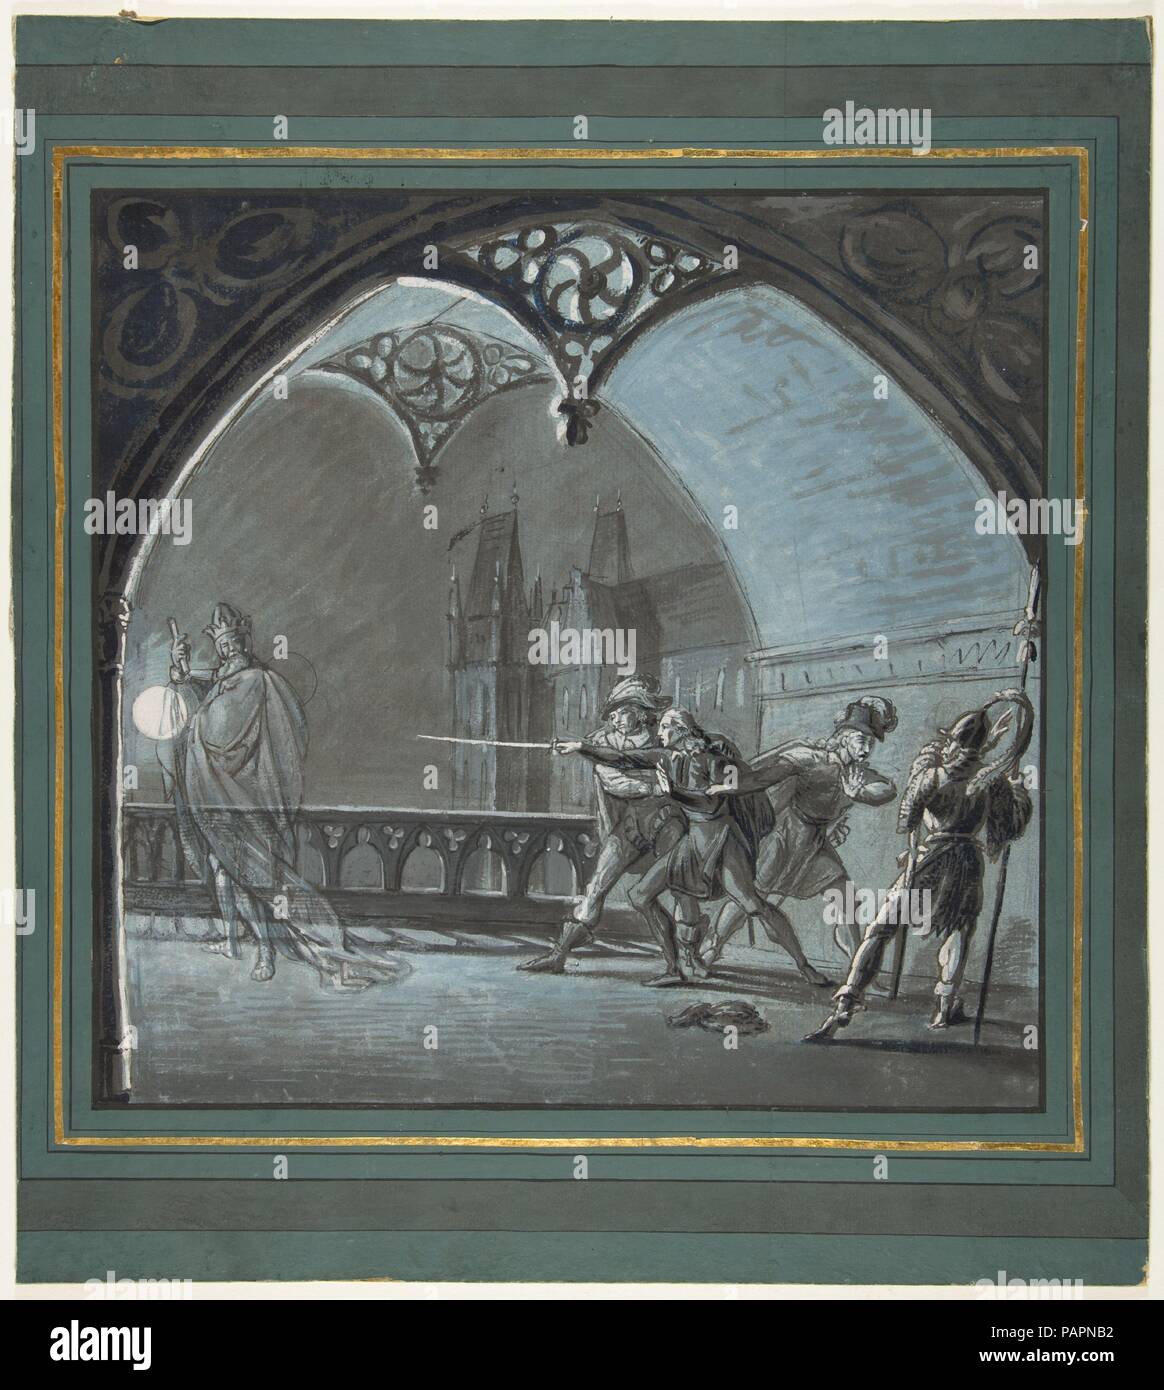 The Ghost of the King Appearing to Hamlet, Horatio and Guards (Hamlet, Act 1, Scene 4). Artist: Anonymous, French, 19th century. Dimensions: sheet: 12 3/4 x 13 1/8 in. (32.4 x 33.3 cm). Former Attribution: Formerly attributed to Anonymous, German, 19th century. Subject: William Shakespeare (British, Stratford-upon-Avon 1564-1616 Stratford-upon-Avon). Date: 19th century. Museum: Metropolitan Museum of Art, New York, USA. Stock Photo